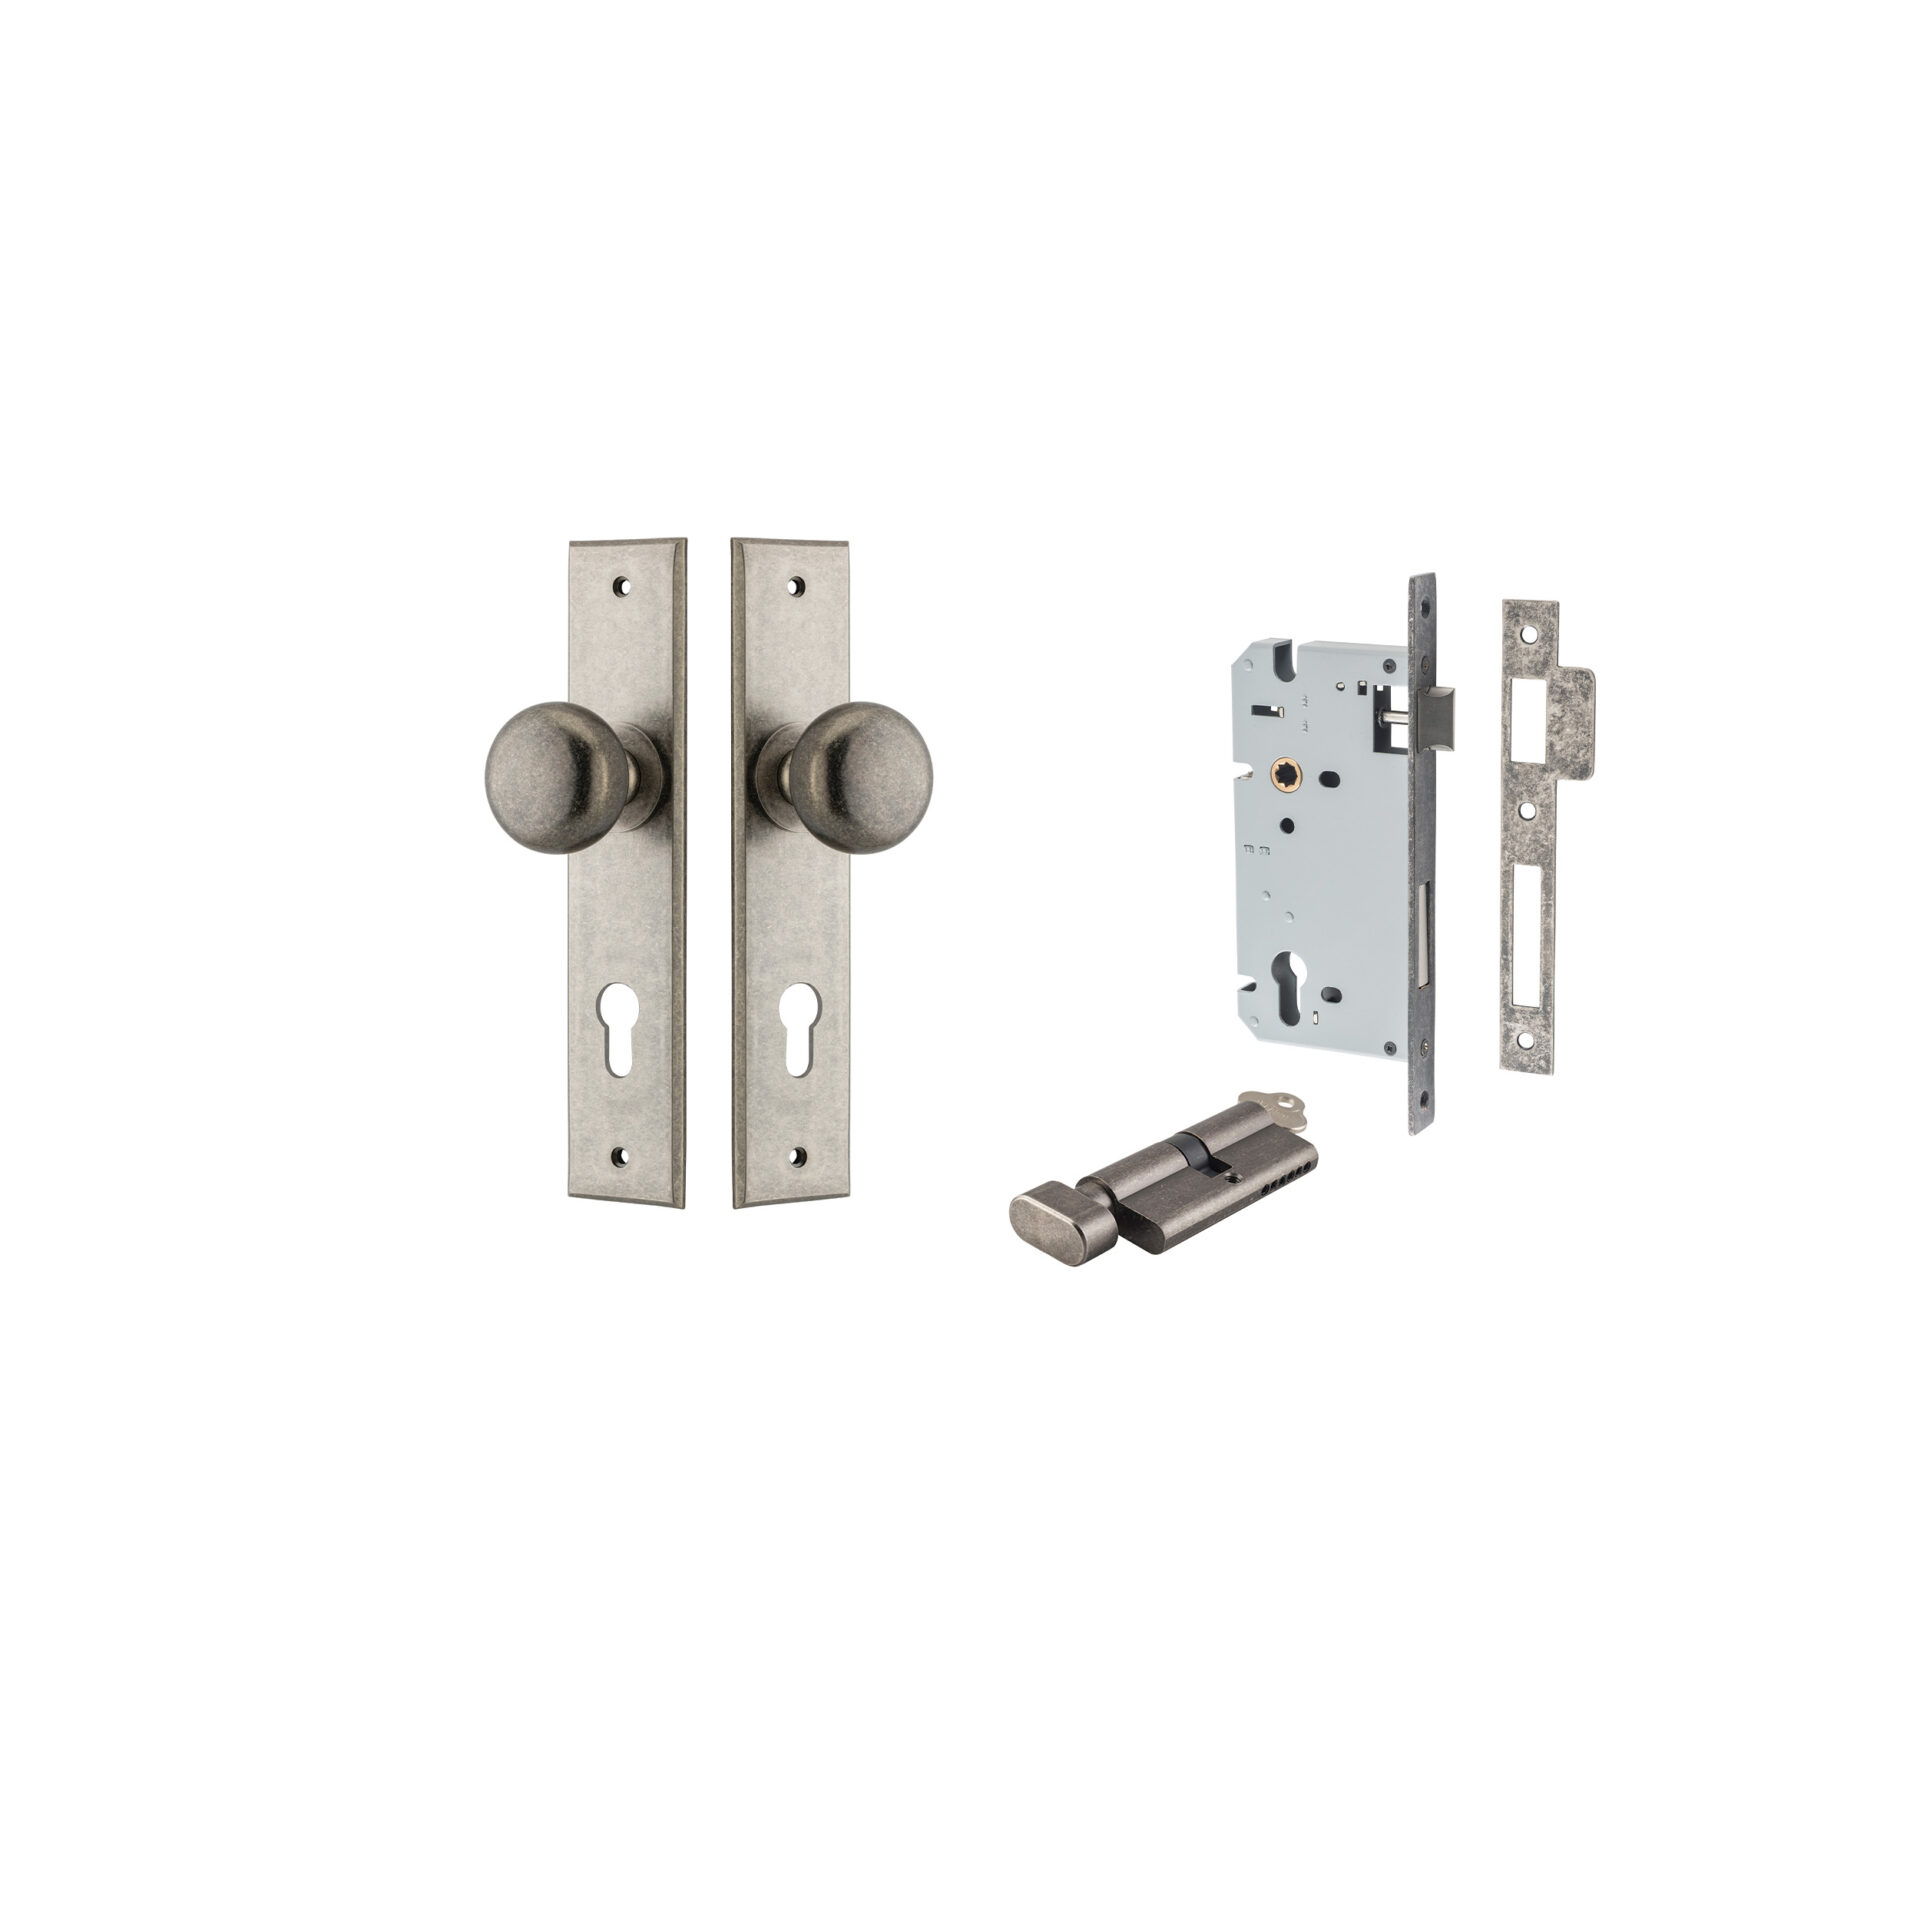 13946KENTR60KT - Cambridge Knob - Chamfered Backplate Entrance Kit with High Security Lock - Distressed Nickel - Entrance